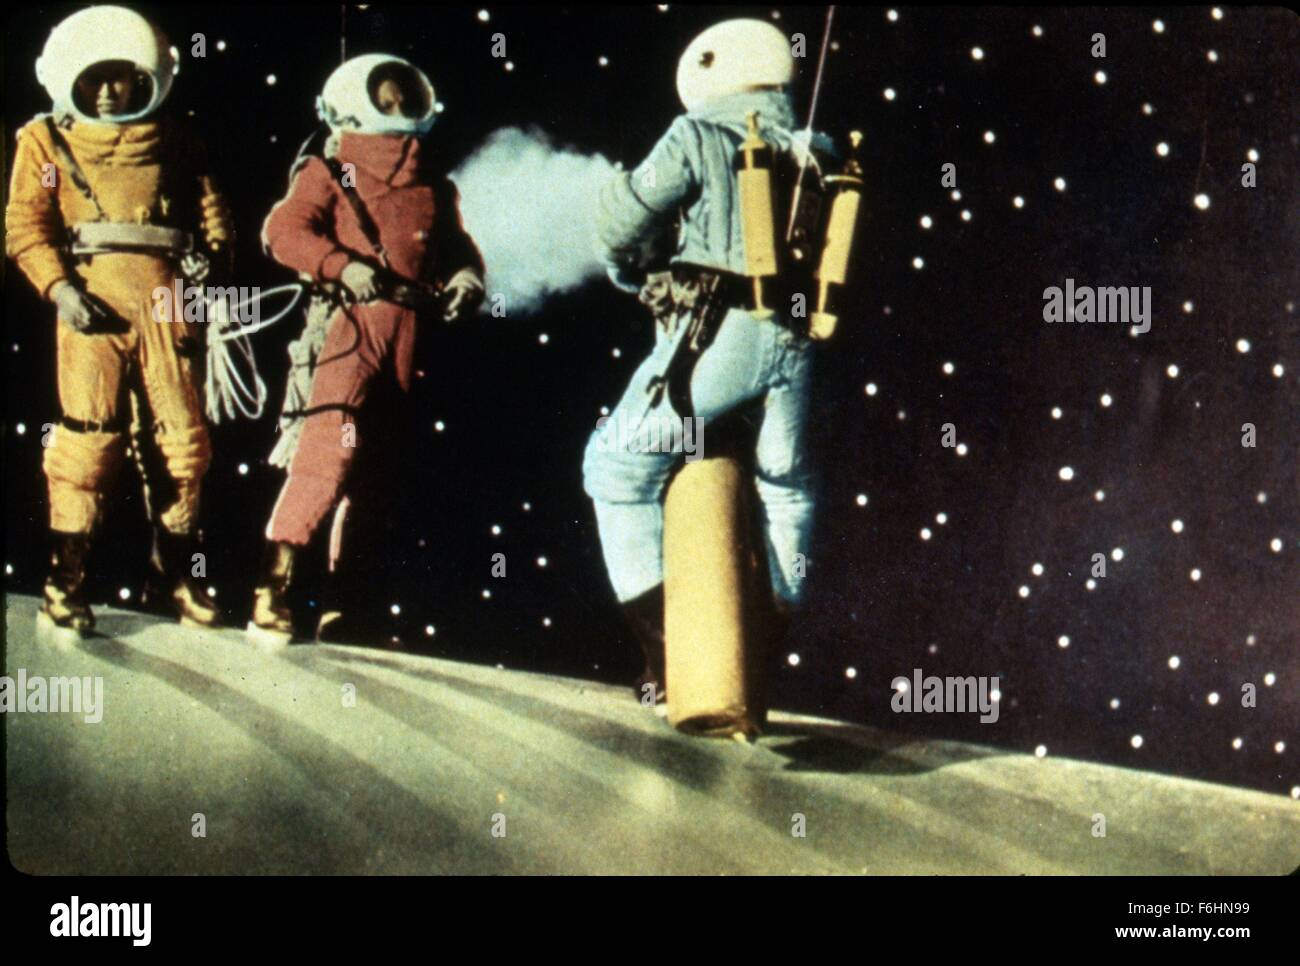 1950, Film Title: DESTINATION MOON, Director: IRVING PICHEL, Studio: EAGLE LION, Pictured: IRVING PICHEL, ITS & ALIENS! THINGS, STARS, SCI-FI, SPACE SUITS, SPACE, ALIENS, SPACE MEN, MOON. (Credit Image: SNAP) Stock Photo